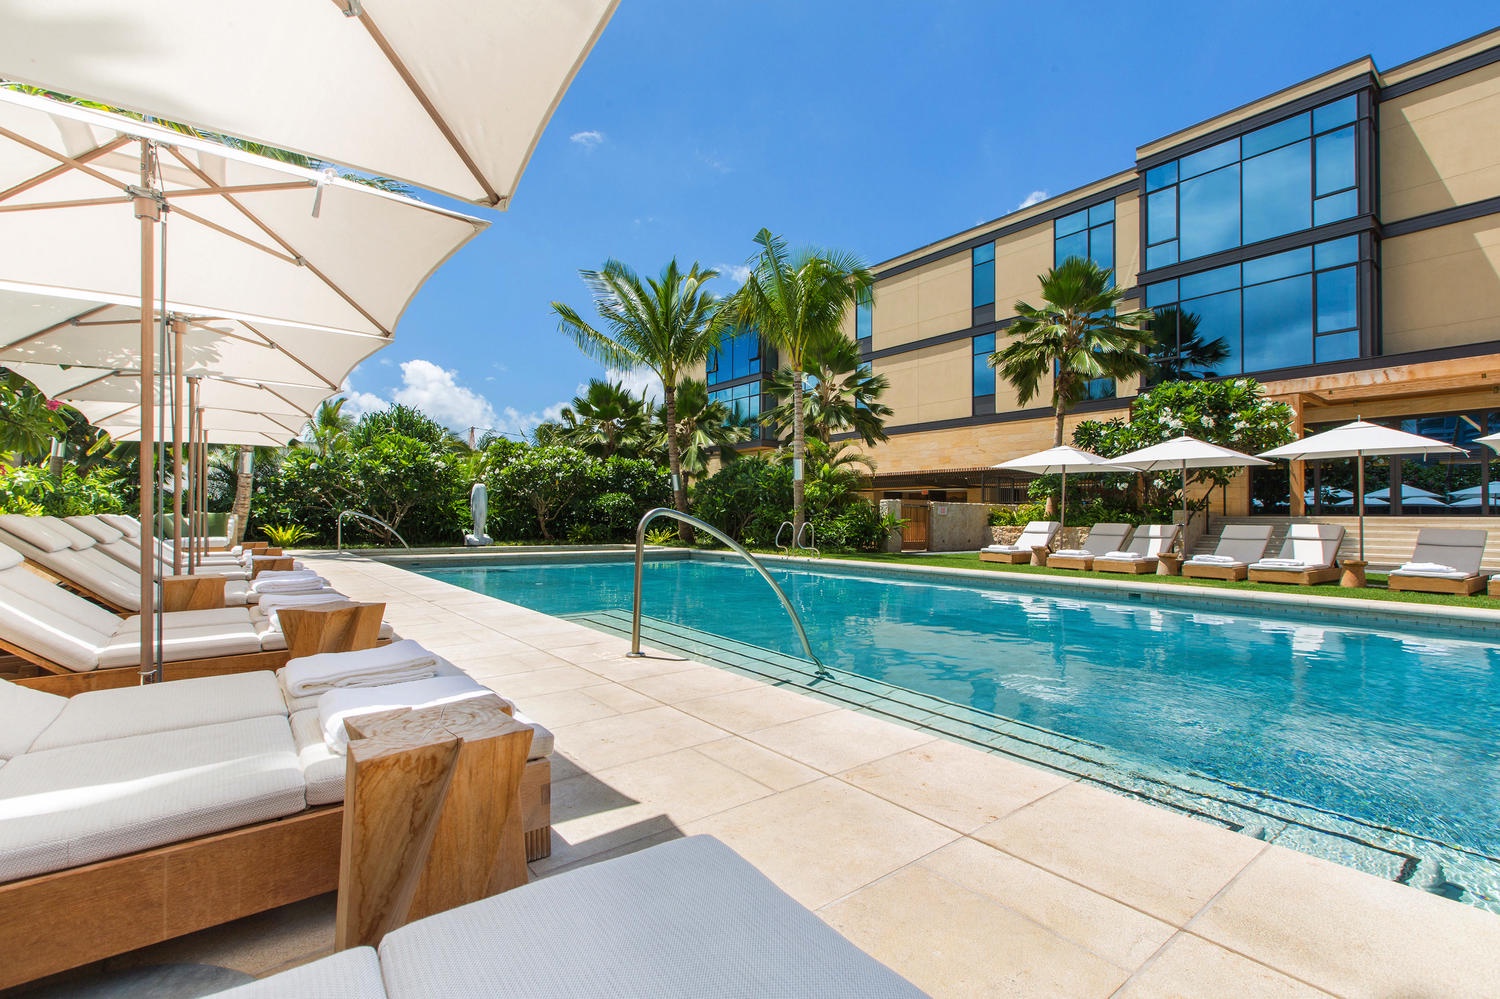 Honolulu Vacation Rentals, Park Lane Sky Resort - Cool off in the pool or soak up the sun poolside on the deck